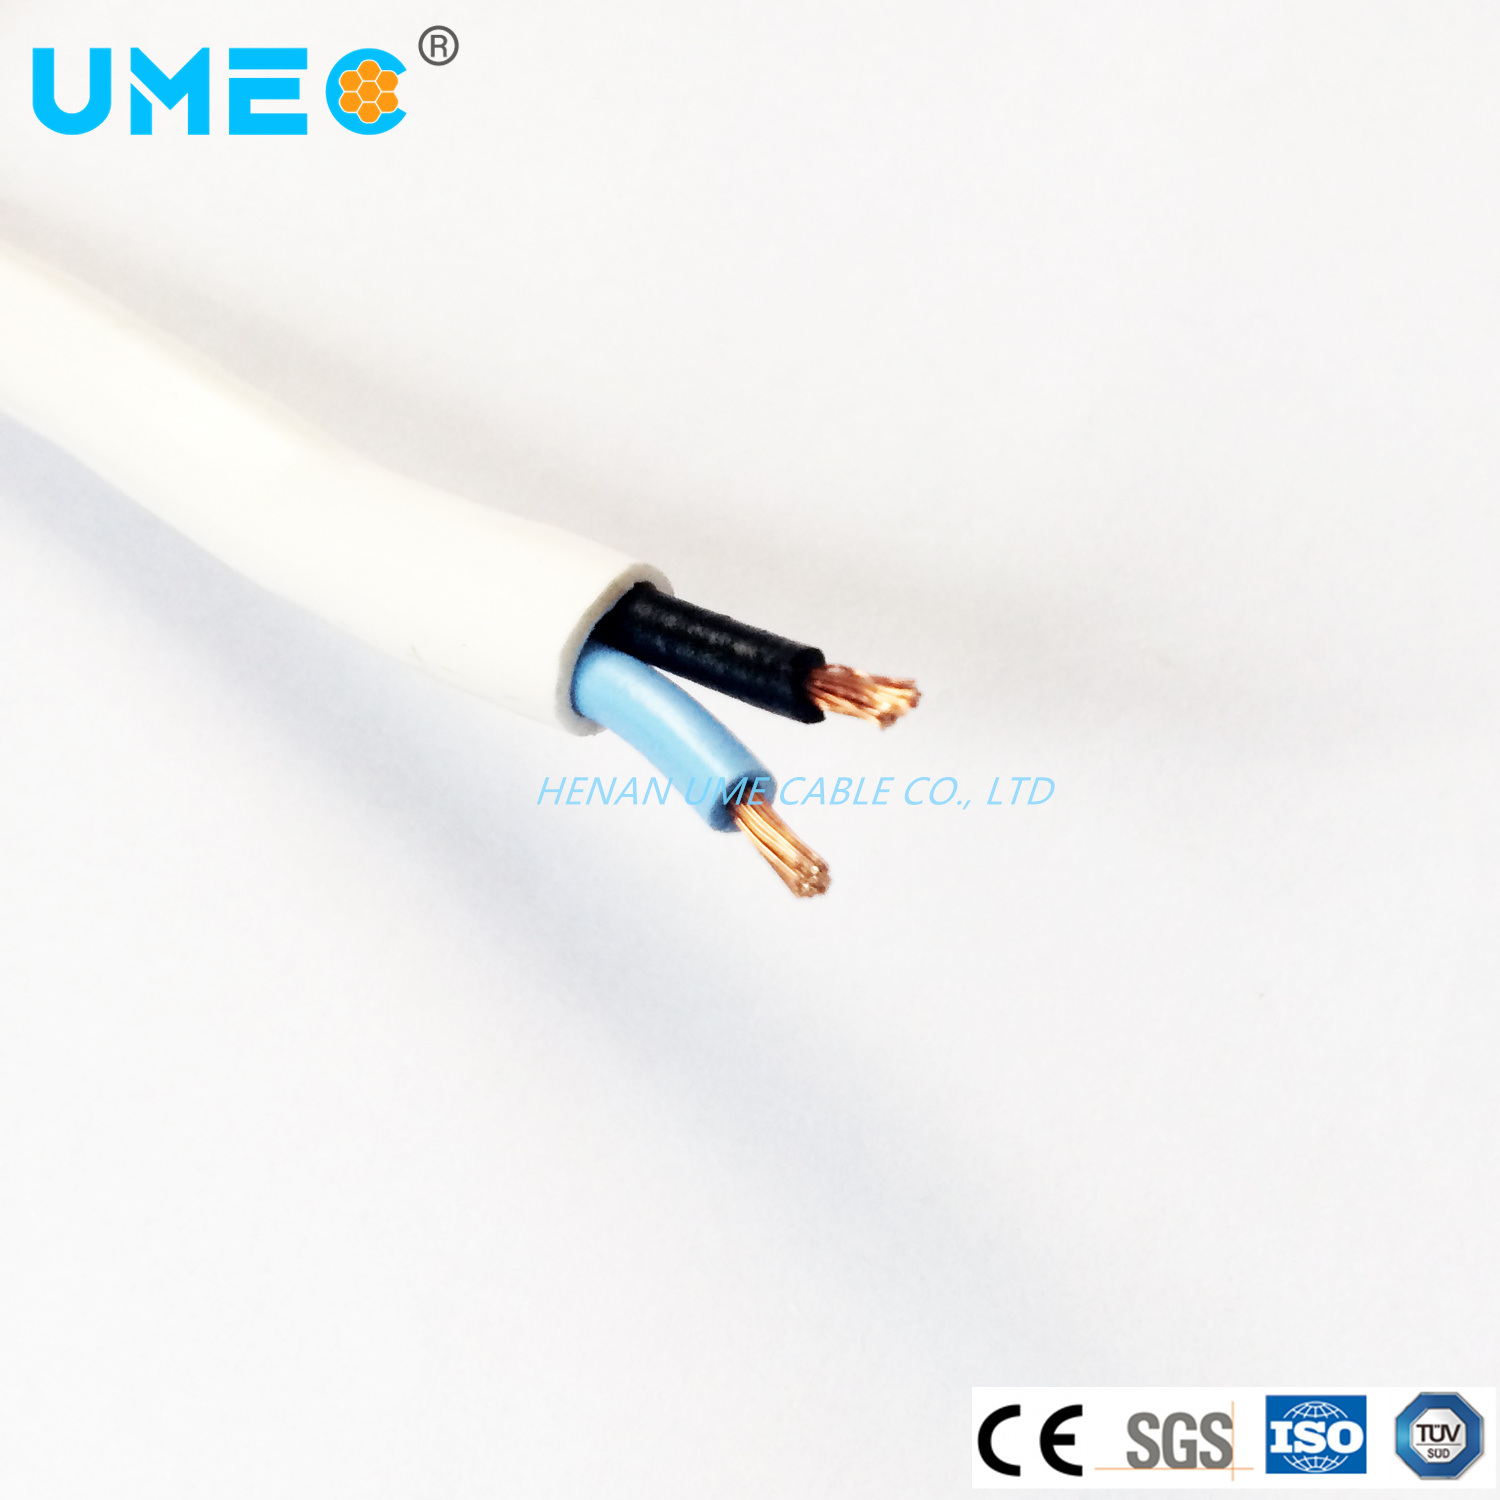 300/500V Flexible Cable H05vvf Power Cable